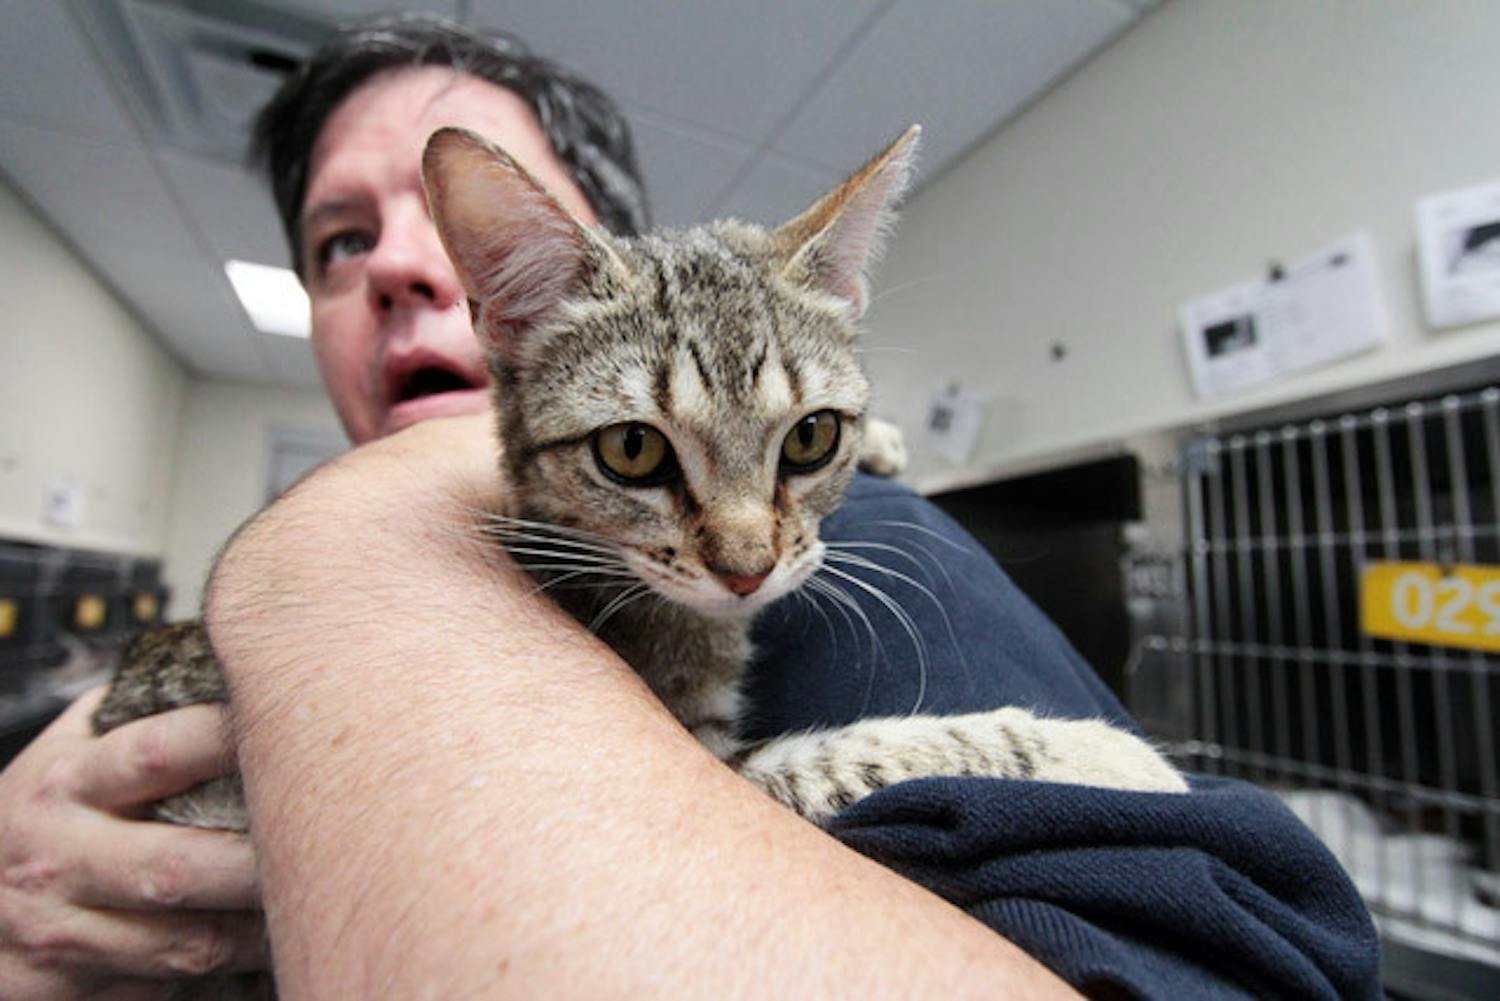 Nina, a stray brown tabby cat, lays in the arms of Vernon Sawyer, acting director of Alachua County Animal Services, Tuesday afternoon. Soon some of the cats will be moving to a new cat adoption facility in the lobby that includes two- to four-room cat condos.